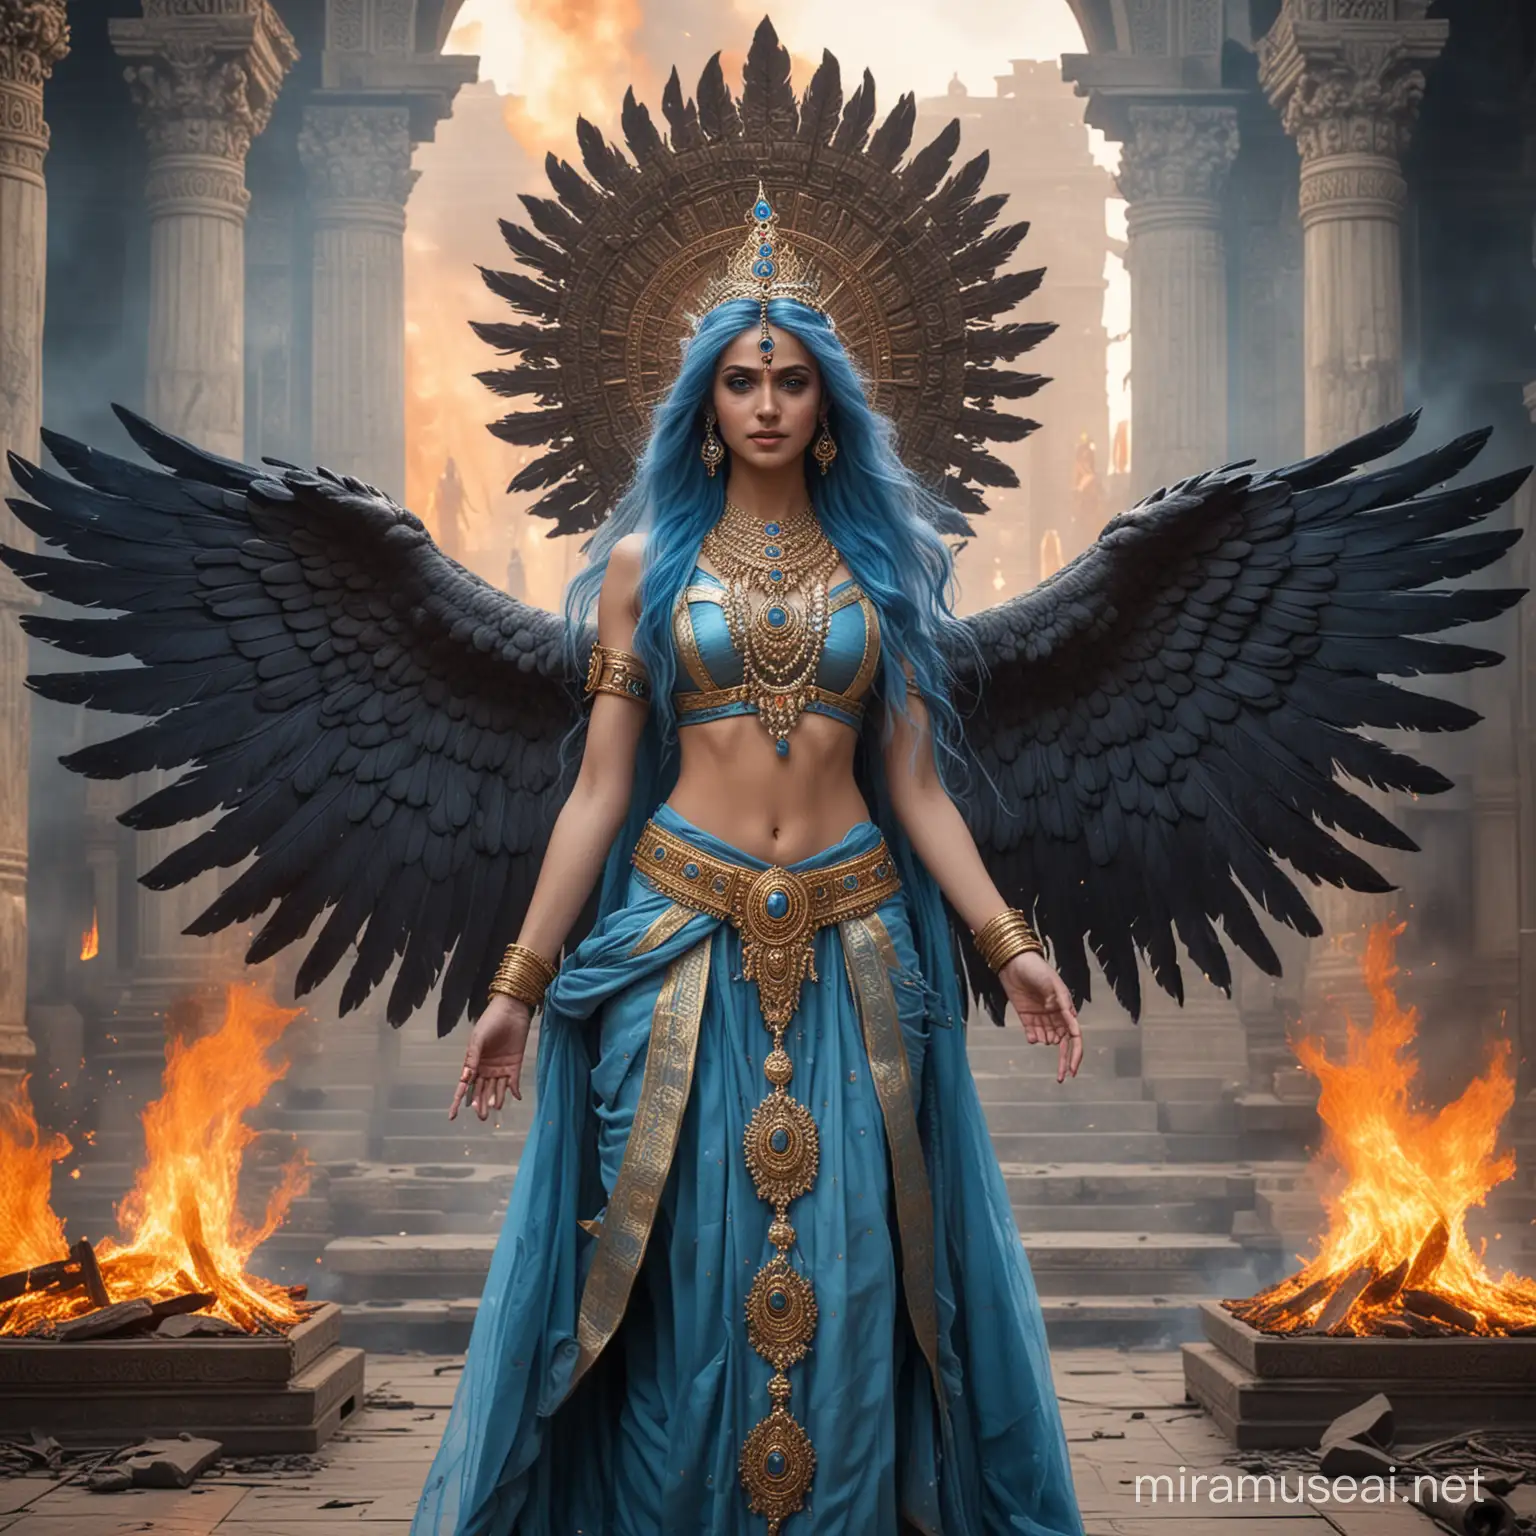 Majestic Hindu Empress Warrior with Blue Hair Surrounded by Divine Flames